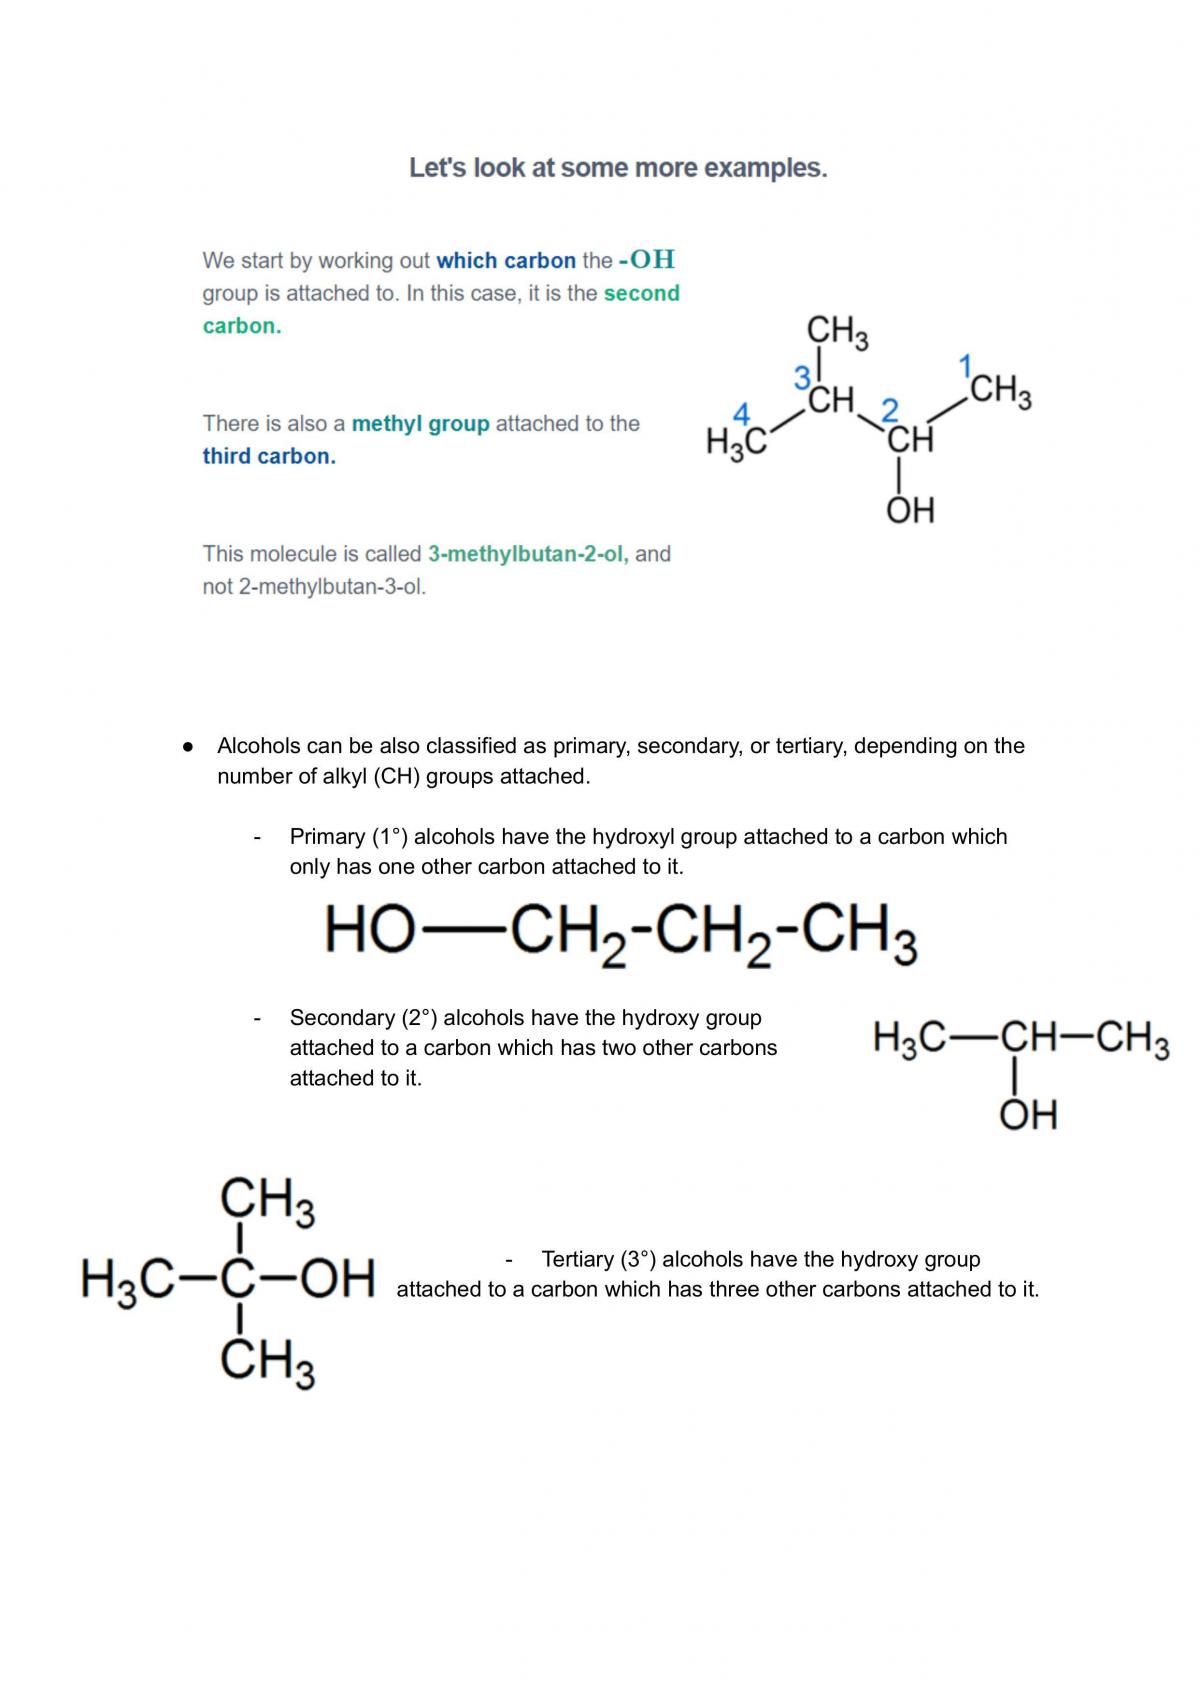 Tie-breaker rules for IUPAC nomenclature of organic compounds - Chemistry  Stack Exchange